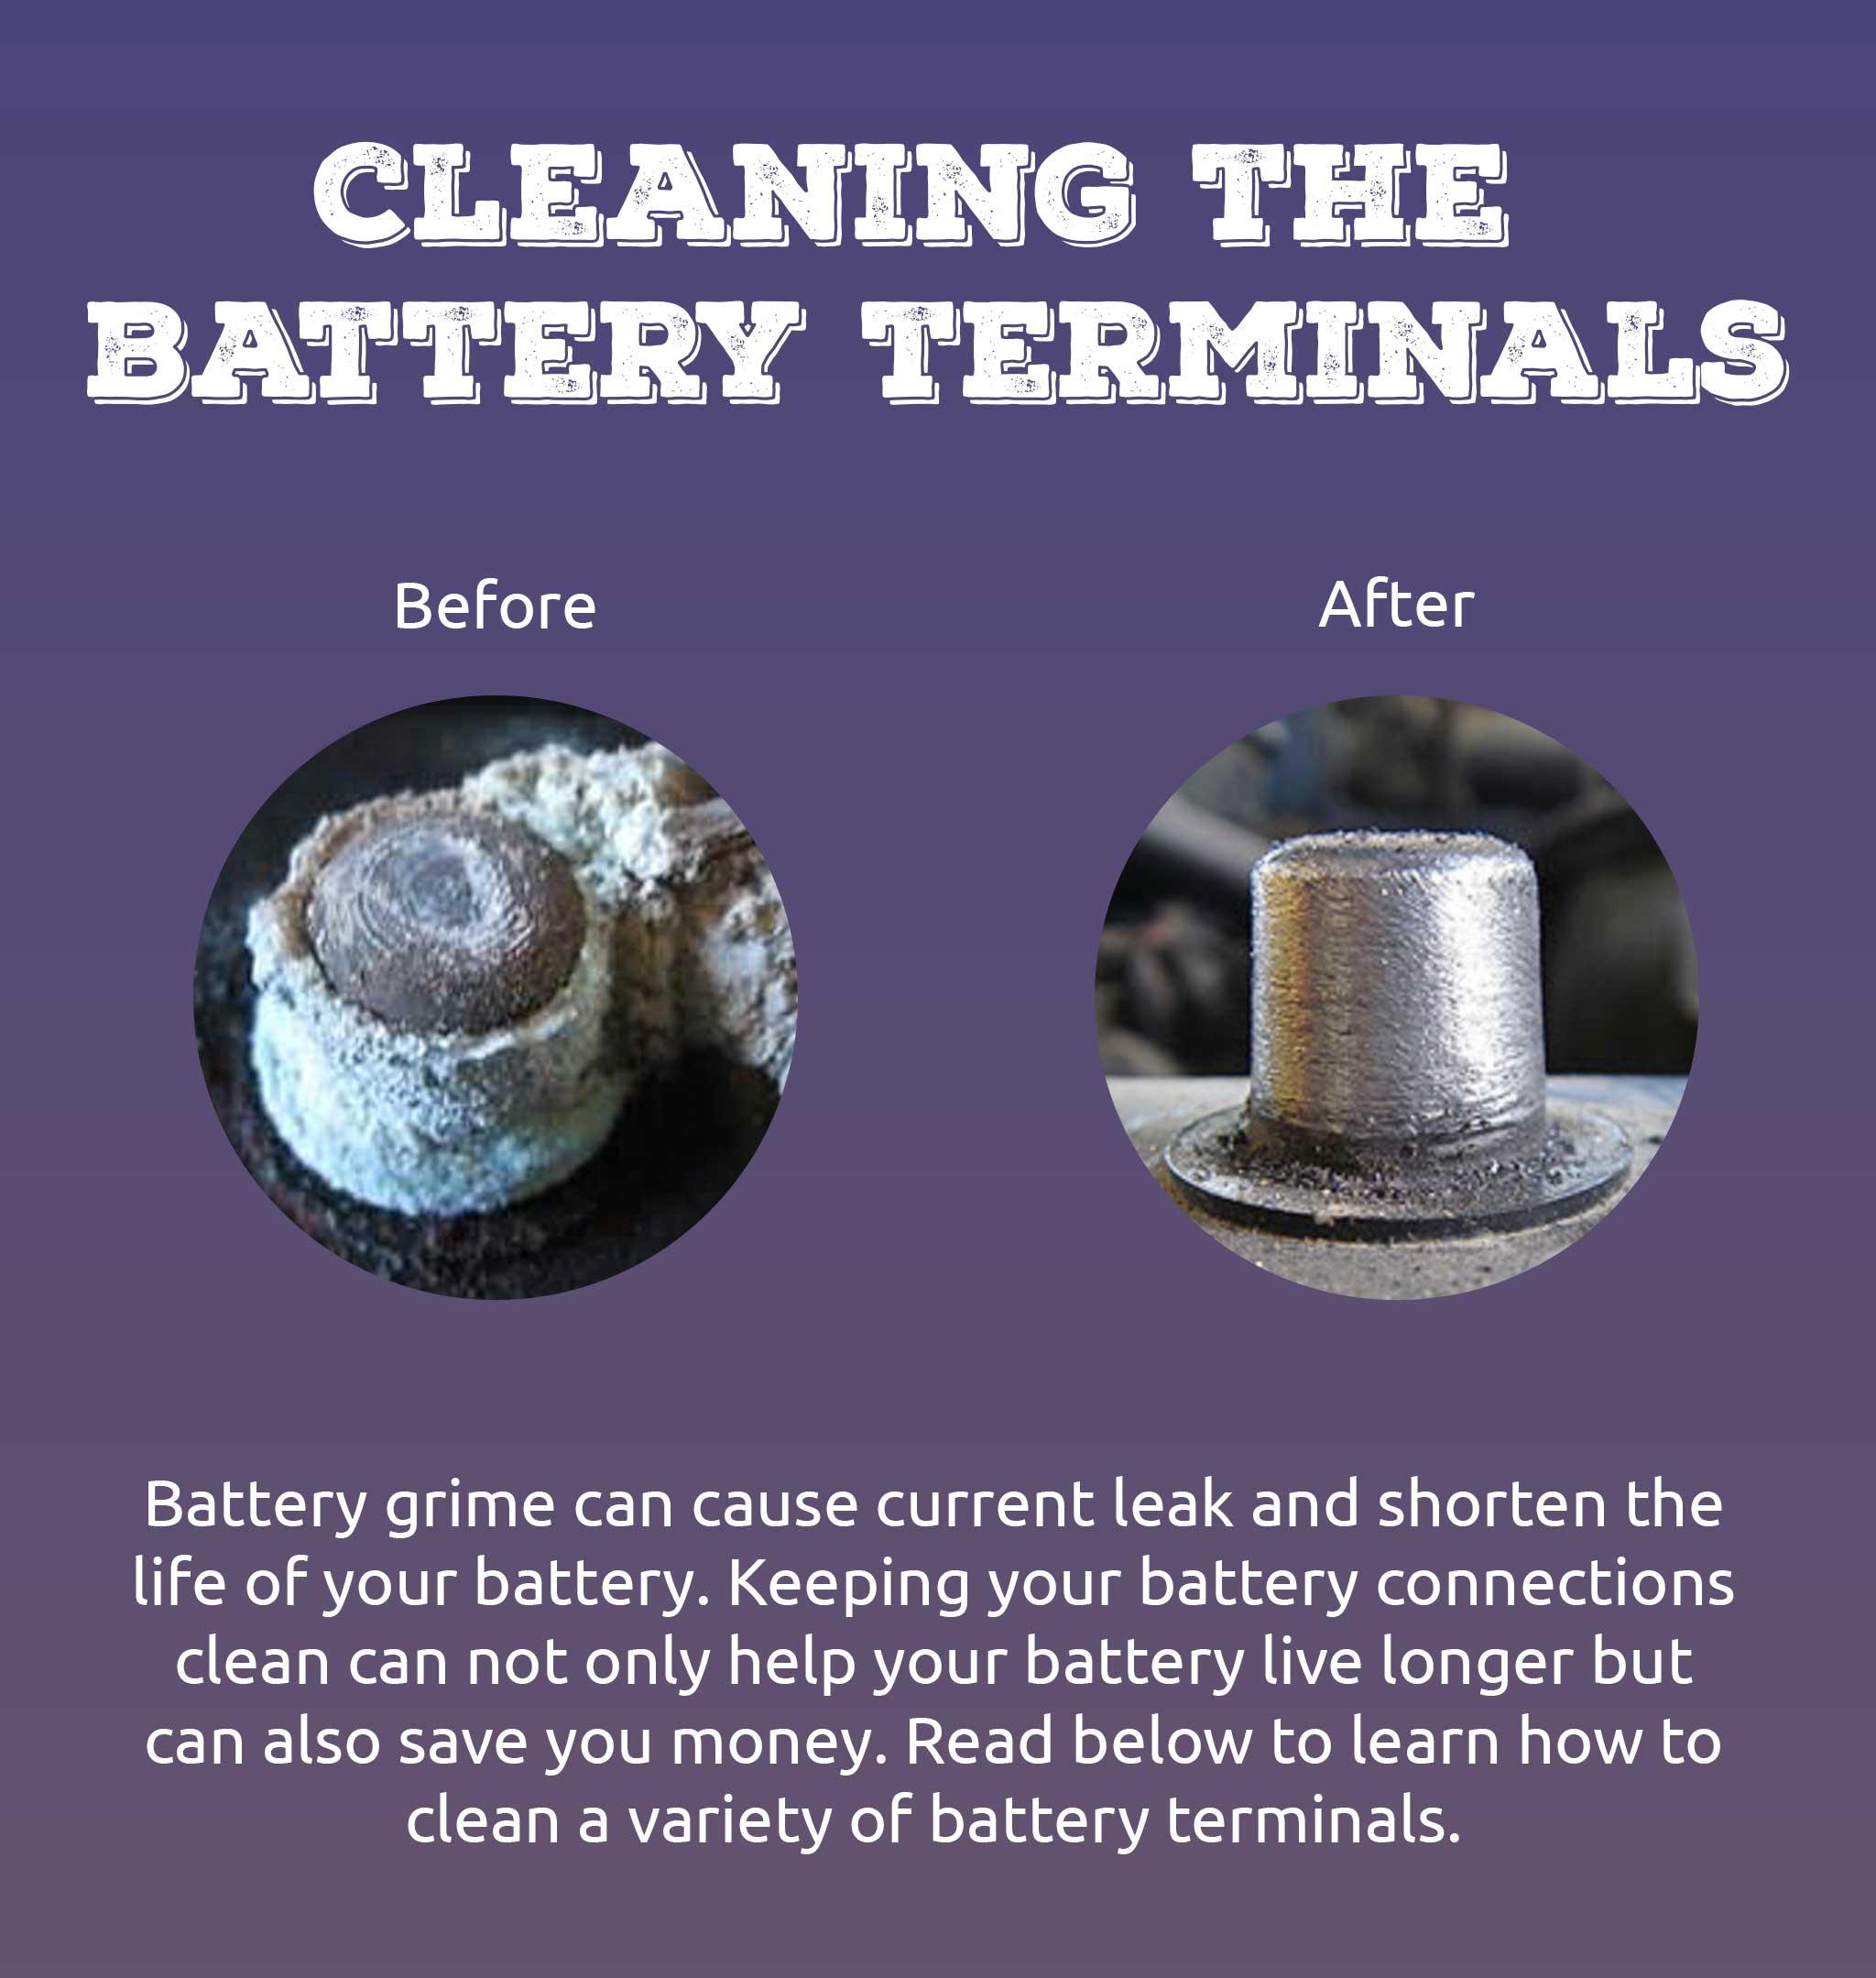 Battery grime can cause current leak and shorten the life of your battery. Keeping your battery connections clean can not only help your battery live longer but can also save you money. Read below to learn how to clean a variety of battery terminals.